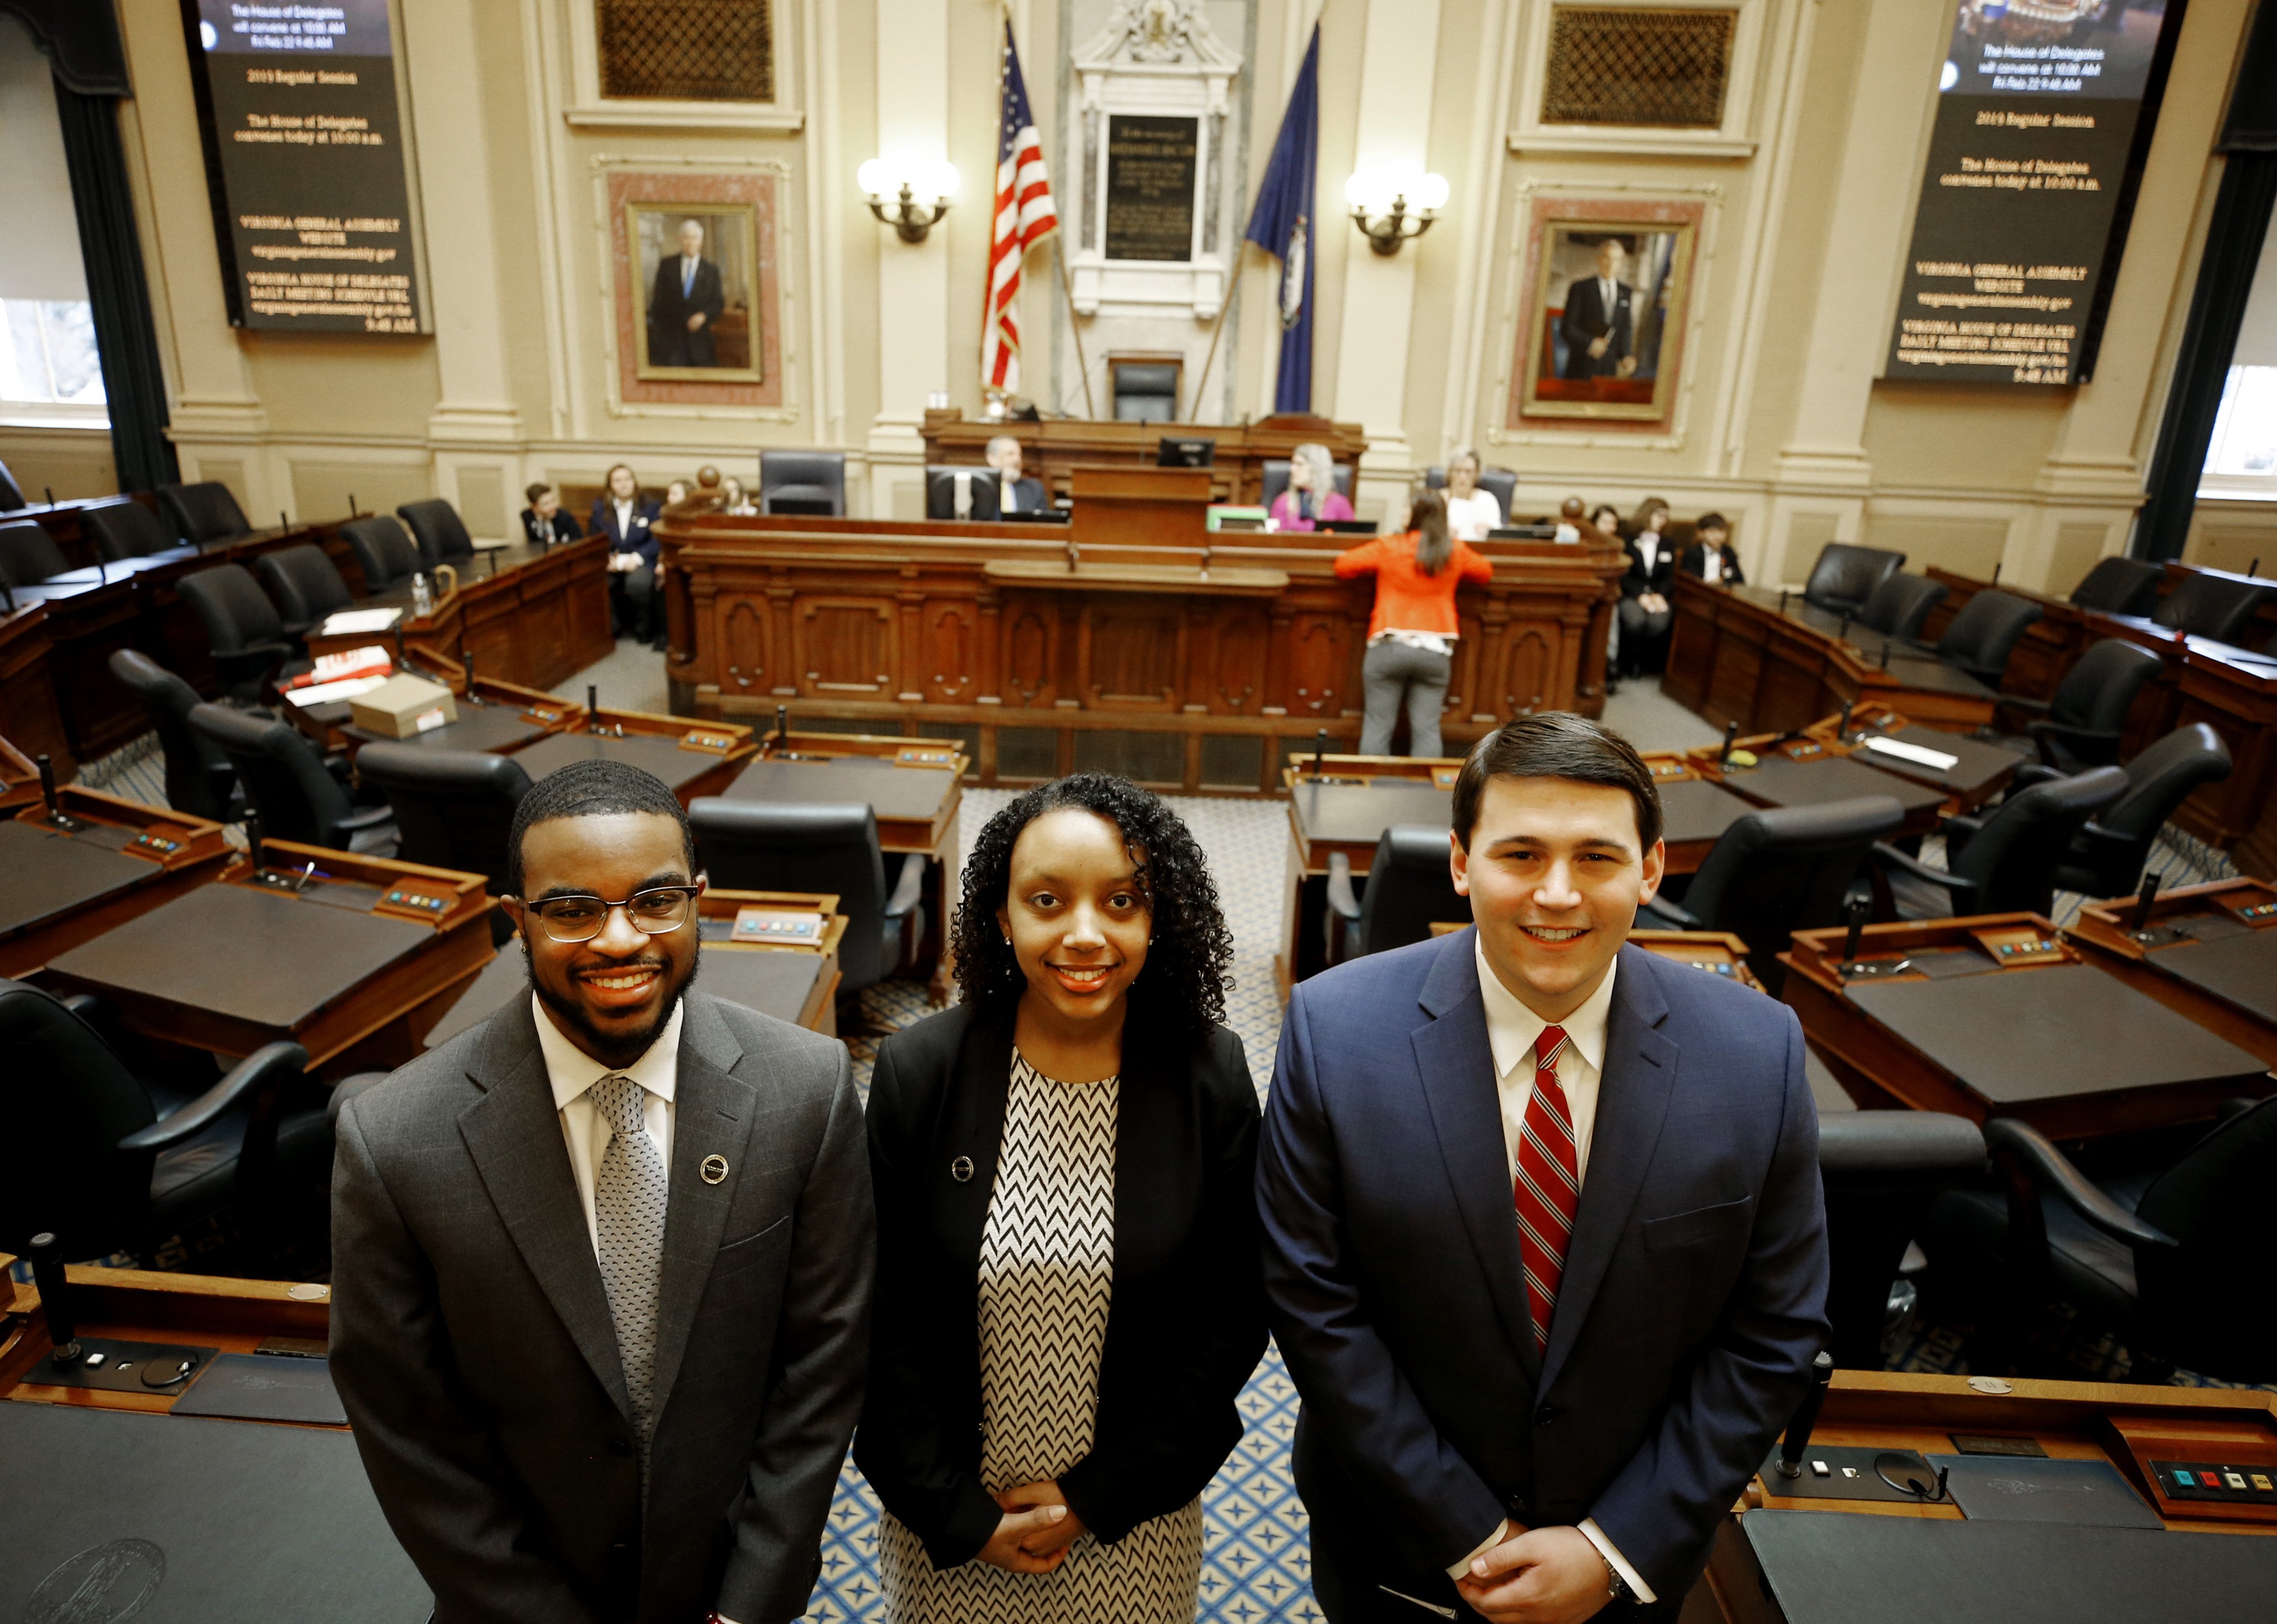  Jesiaah Hoskins, Feven Negussie and Jacob Parcell spent the winter at the Capitol writing speeches, researching bills and meeting with constituents. 